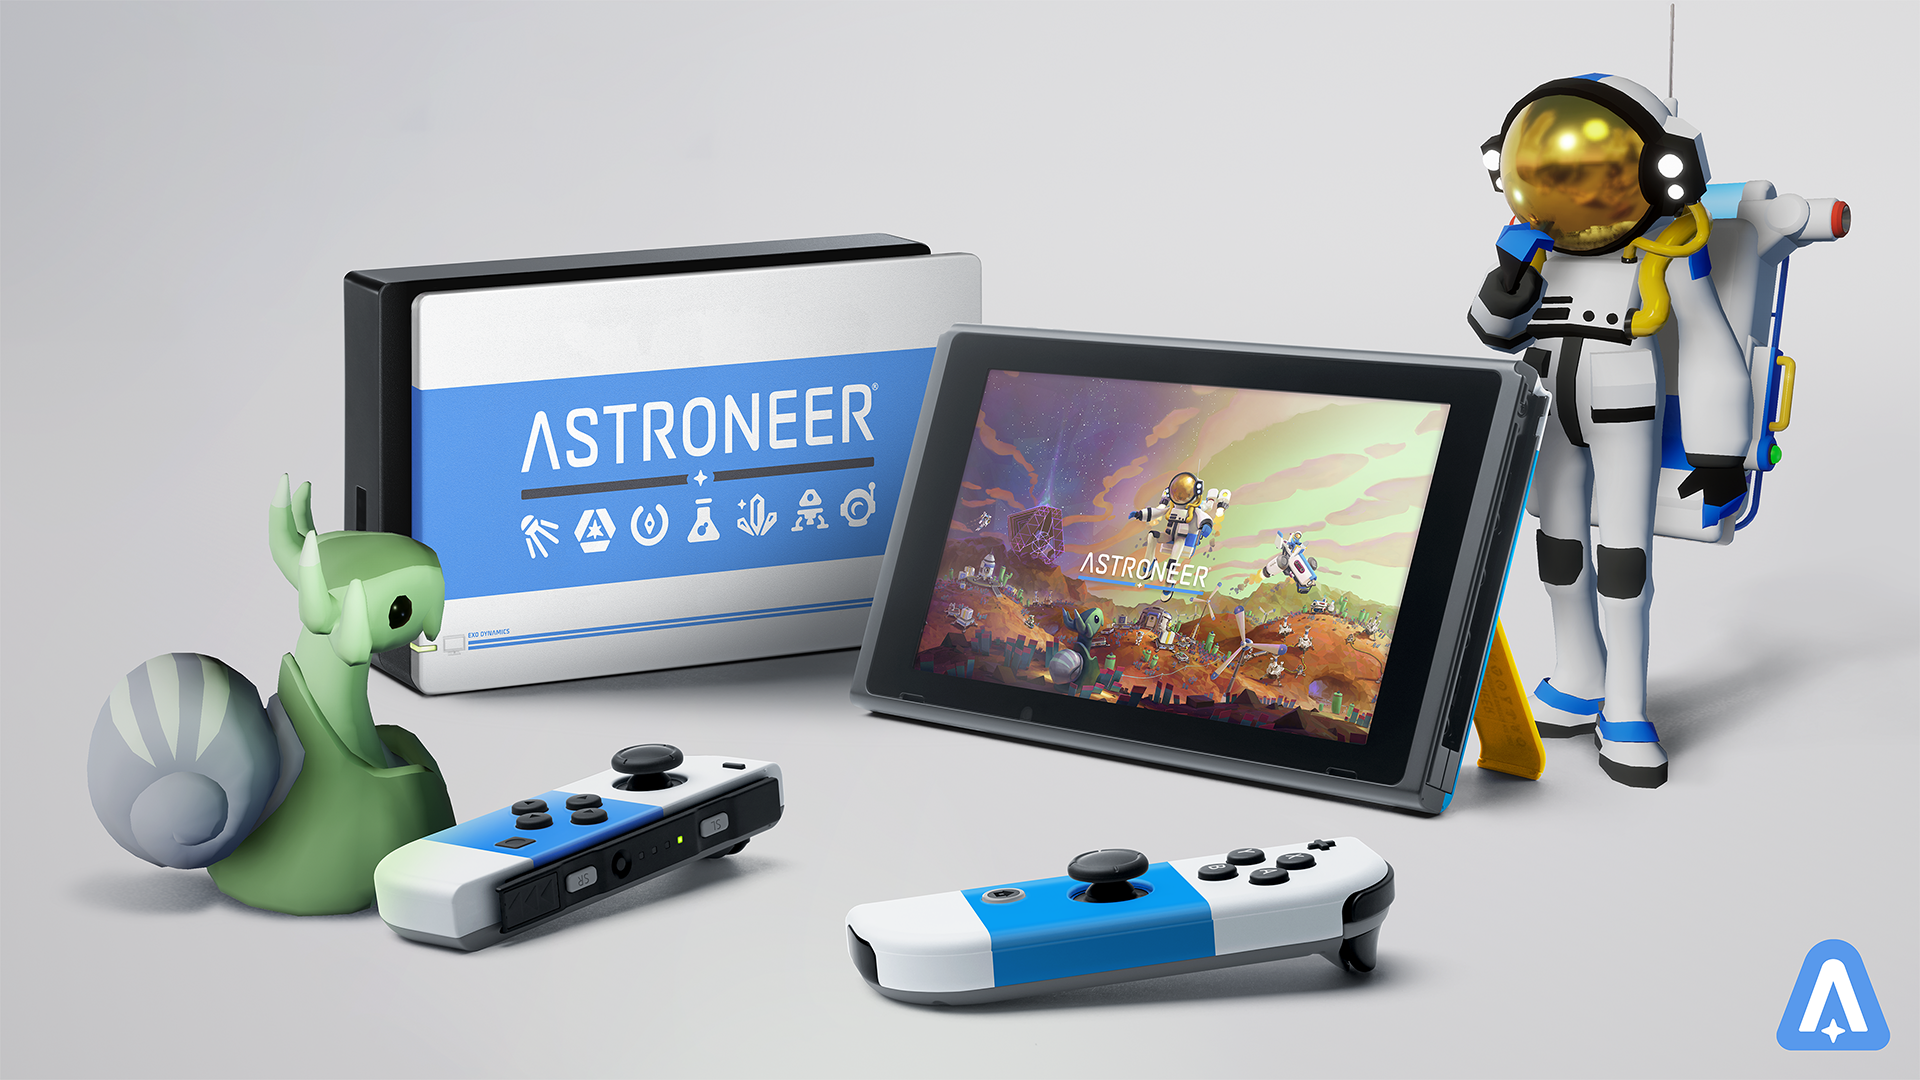 Steam :: ASTRONEER :: Astroneer is now Available on Nintendo Switch!